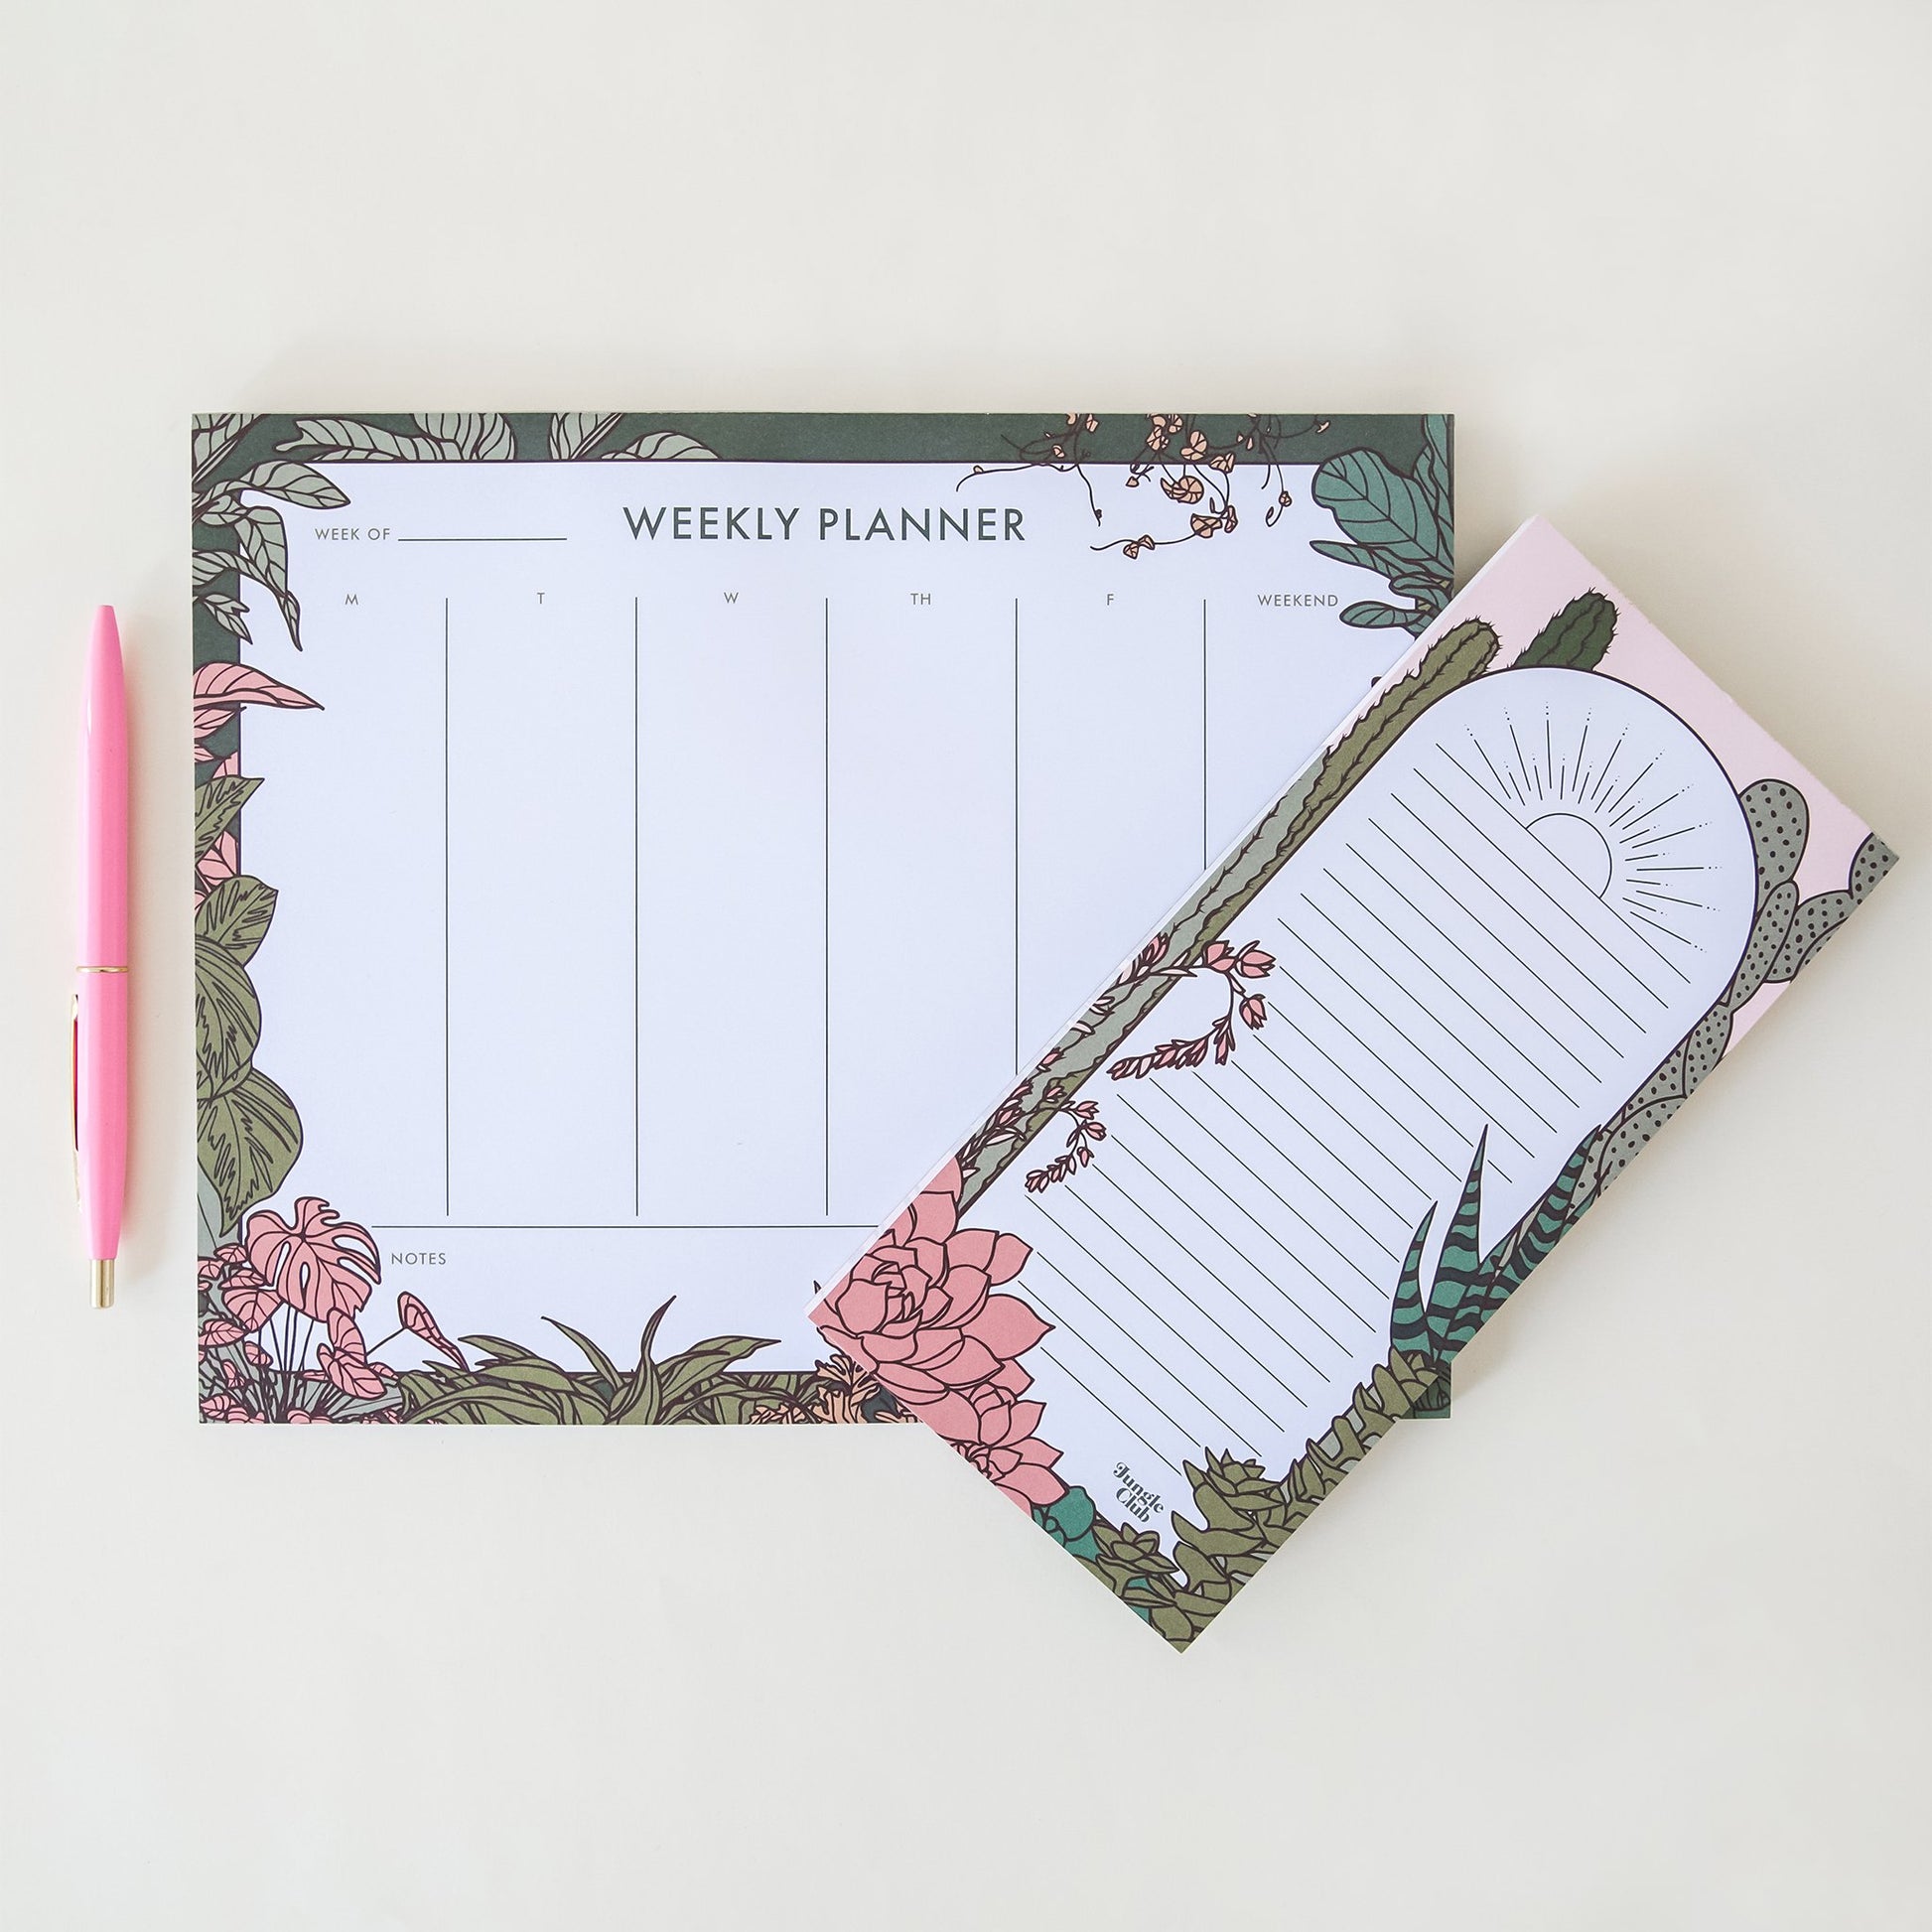 This weekly planner pad has a section for each day of the week with a deep green border, accented by an array of natural, soft toned jungle plants. Besides lays a rectangular notepad bordered with muted cacti and succulent plants. A baby pink ball point pen lays vertically to the left of the weekly planner. 